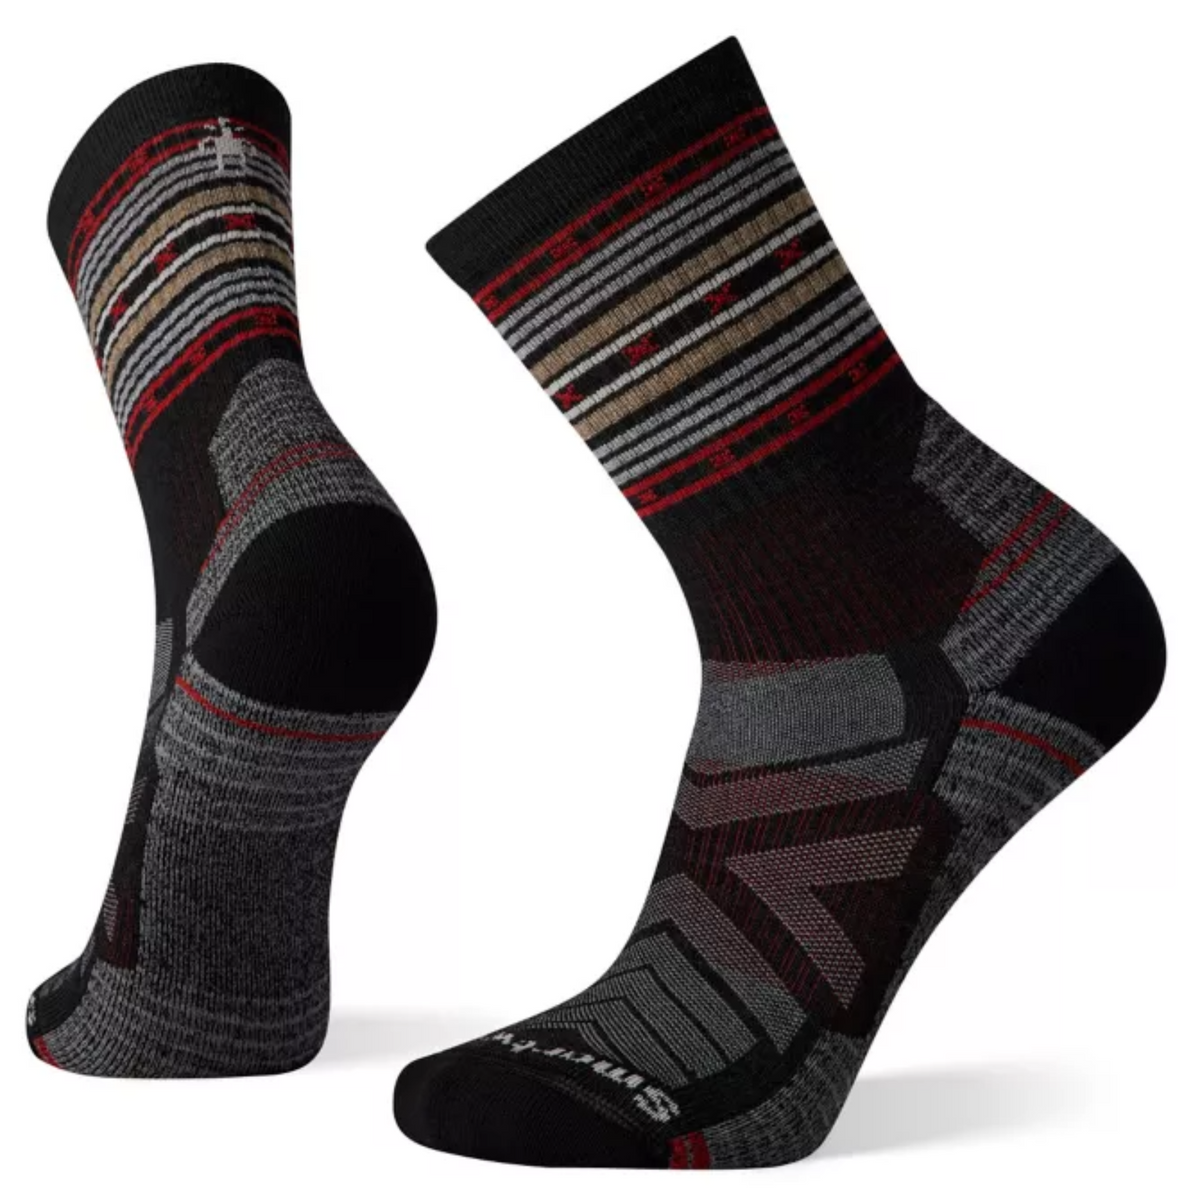 Smartwool Spiked Stripe Hike Light Cushion Crew men&#39;s crew sock featuring charcoal sock with black, red, and gray pattern. Socks shown on display feet from back and side.